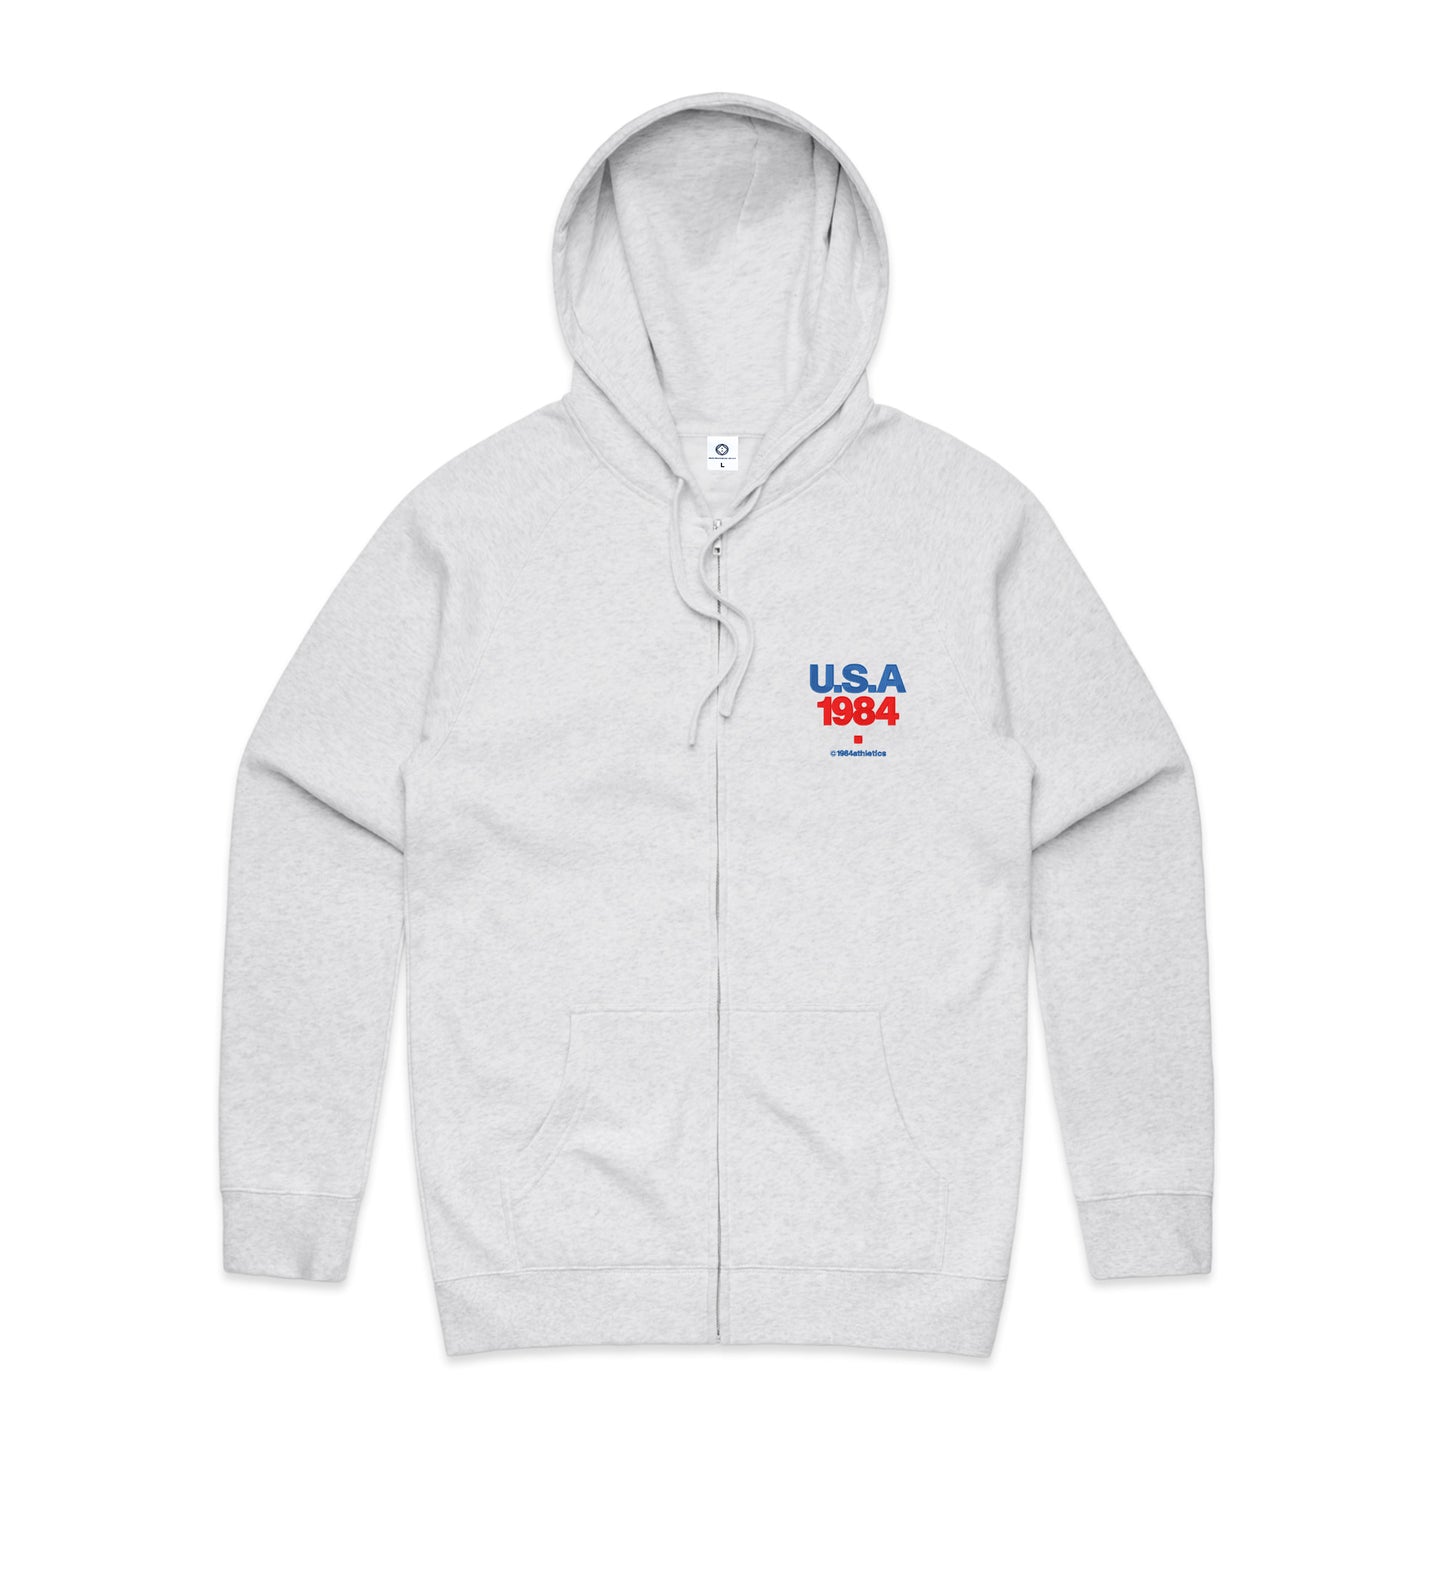 Vice 84 'USA' Embroidered Zip Up Hoodie - Ash Grey